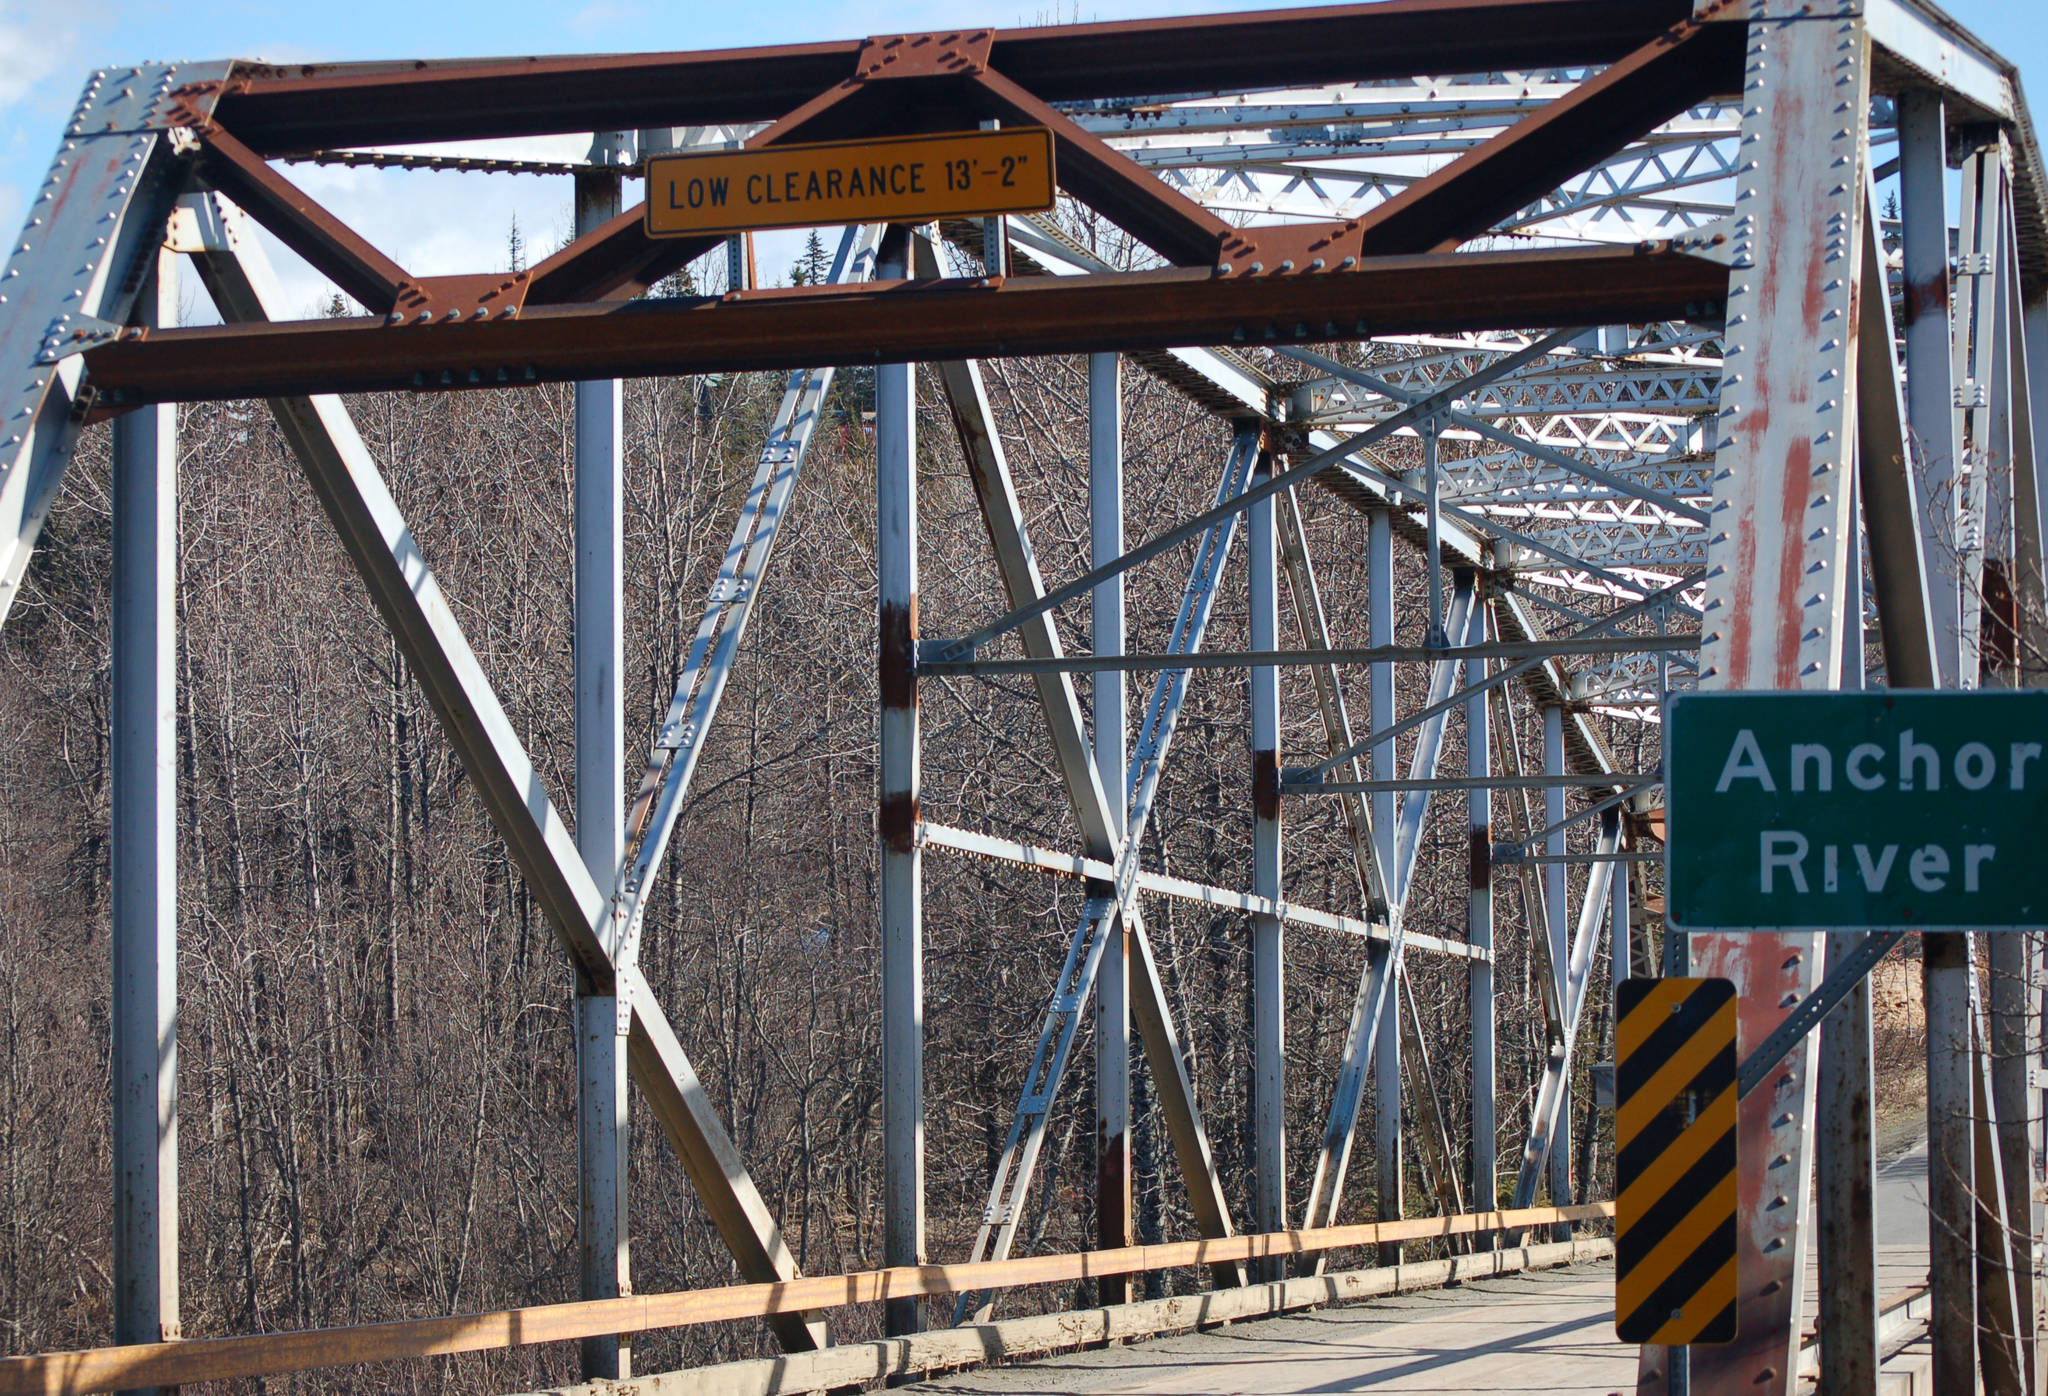 Anchor River Bridge to be closed for repairs